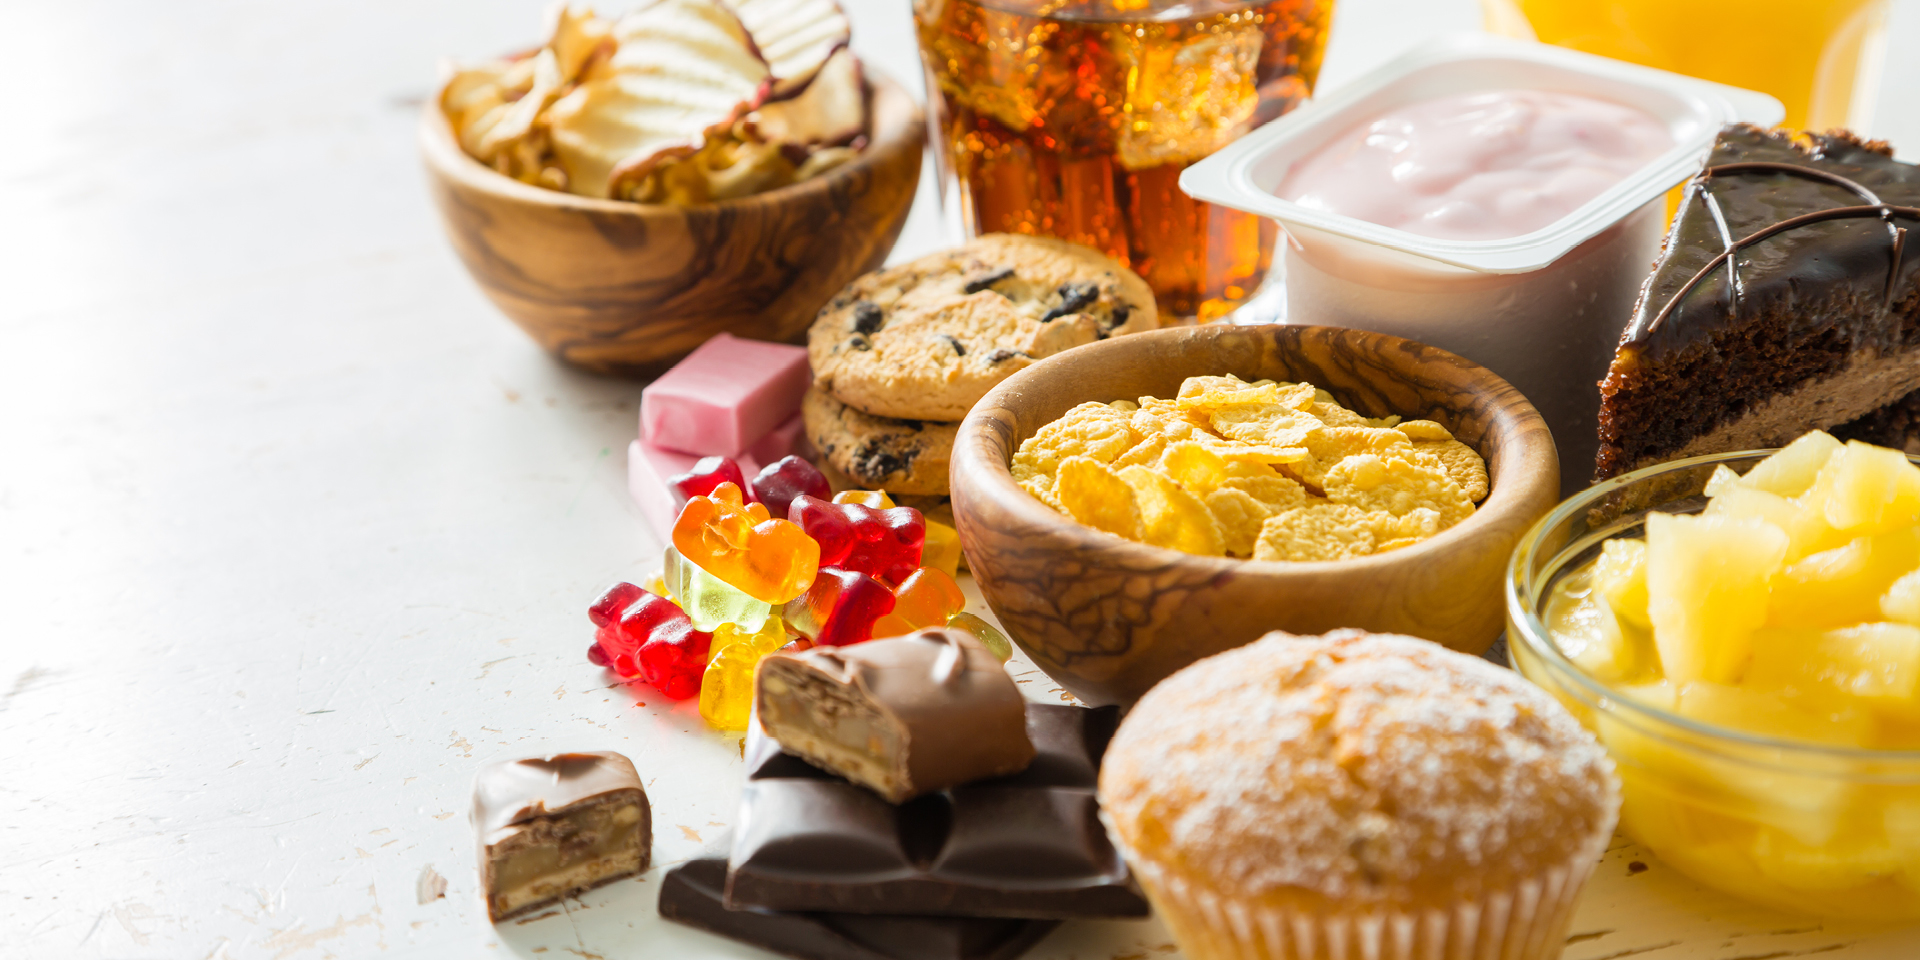 muffins, cookies, chips, and other sugary snacks